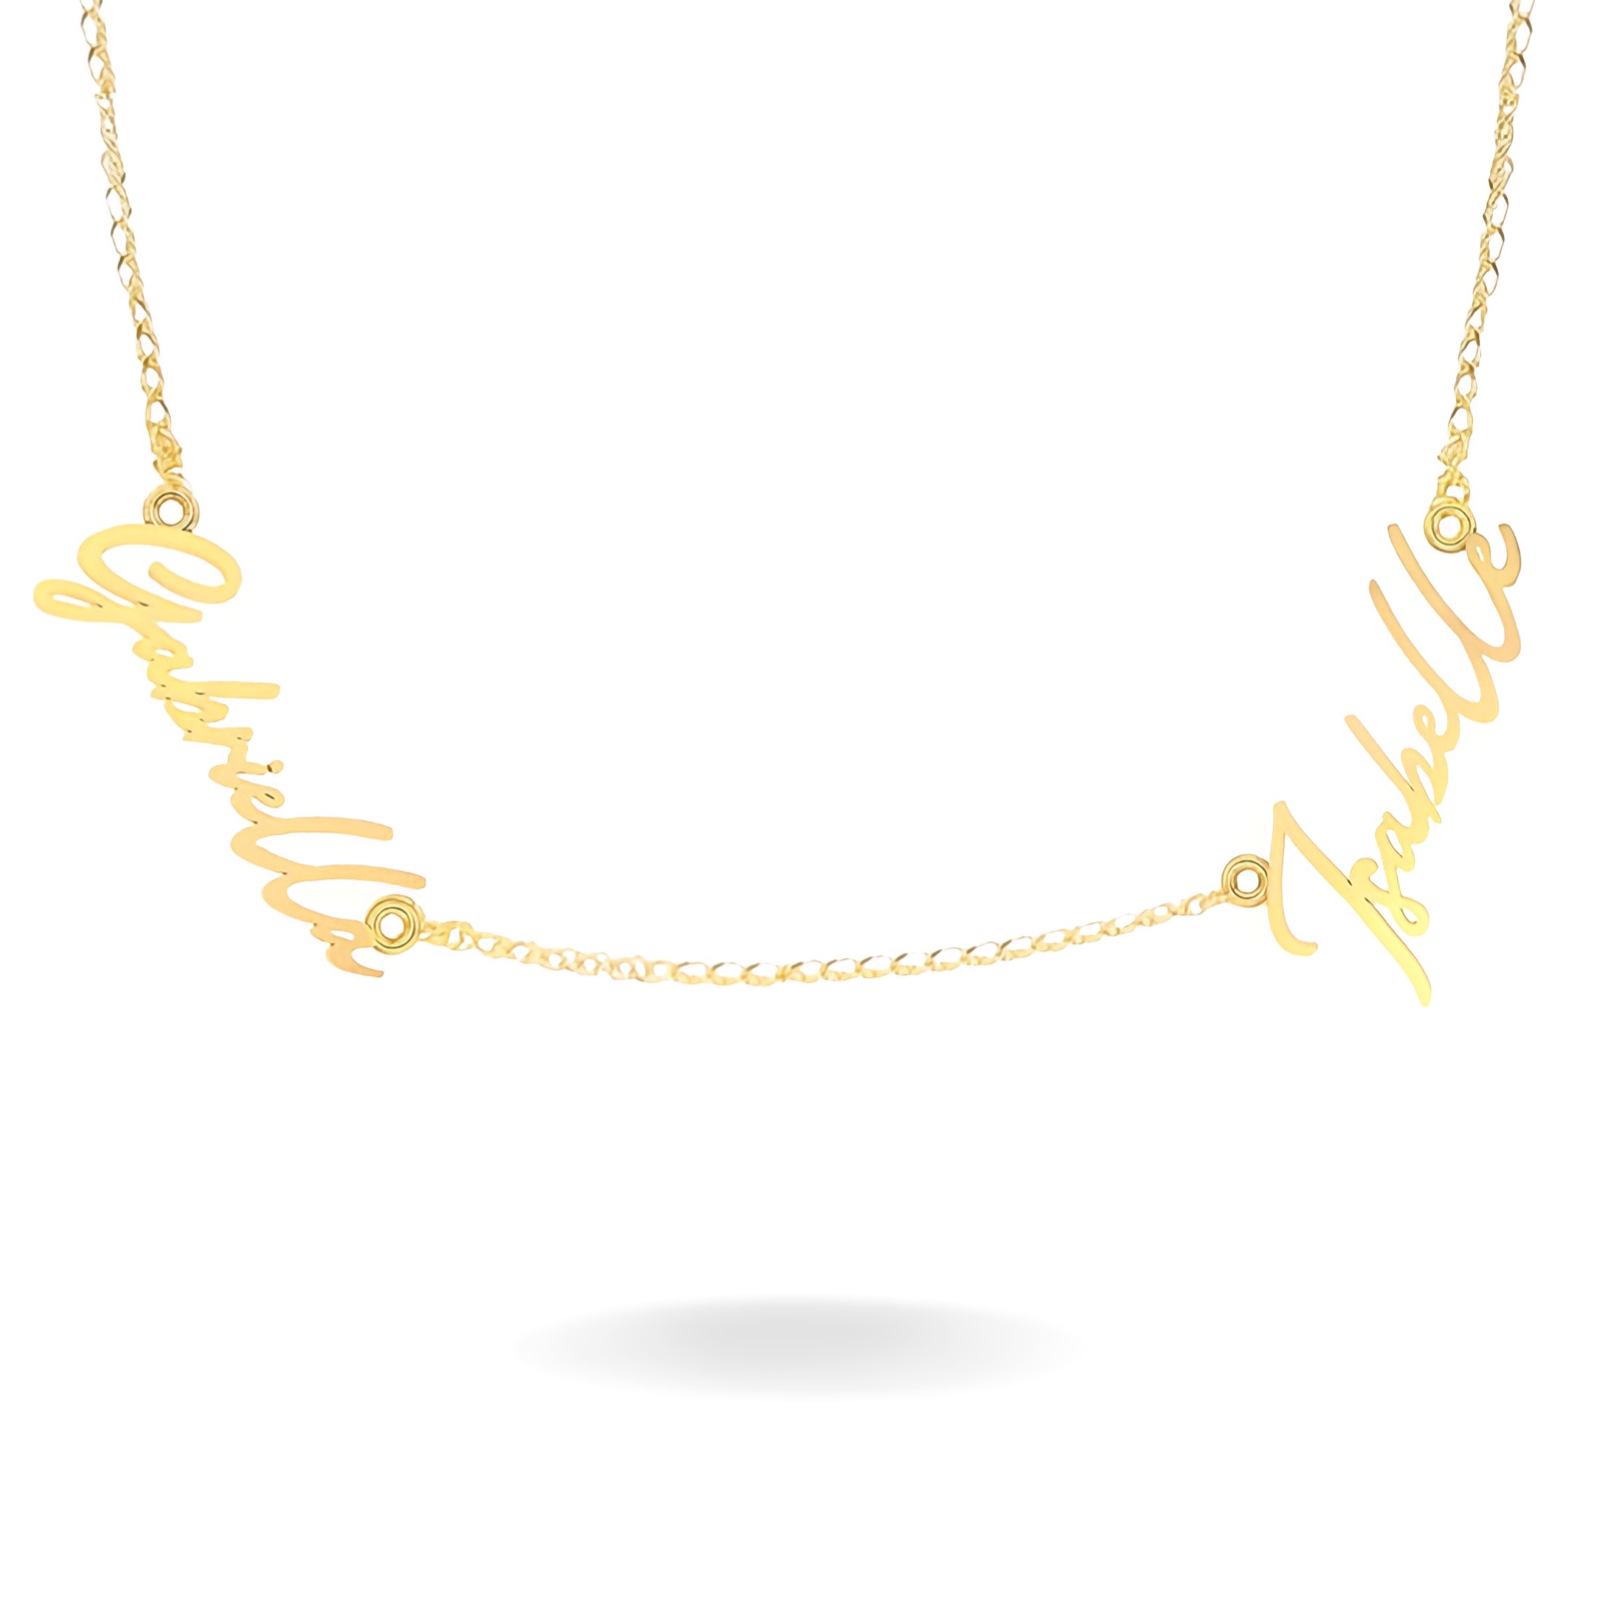 14K YELLOW GOLD SIGNATURE 2 FLOATING NAMES NECKLACE